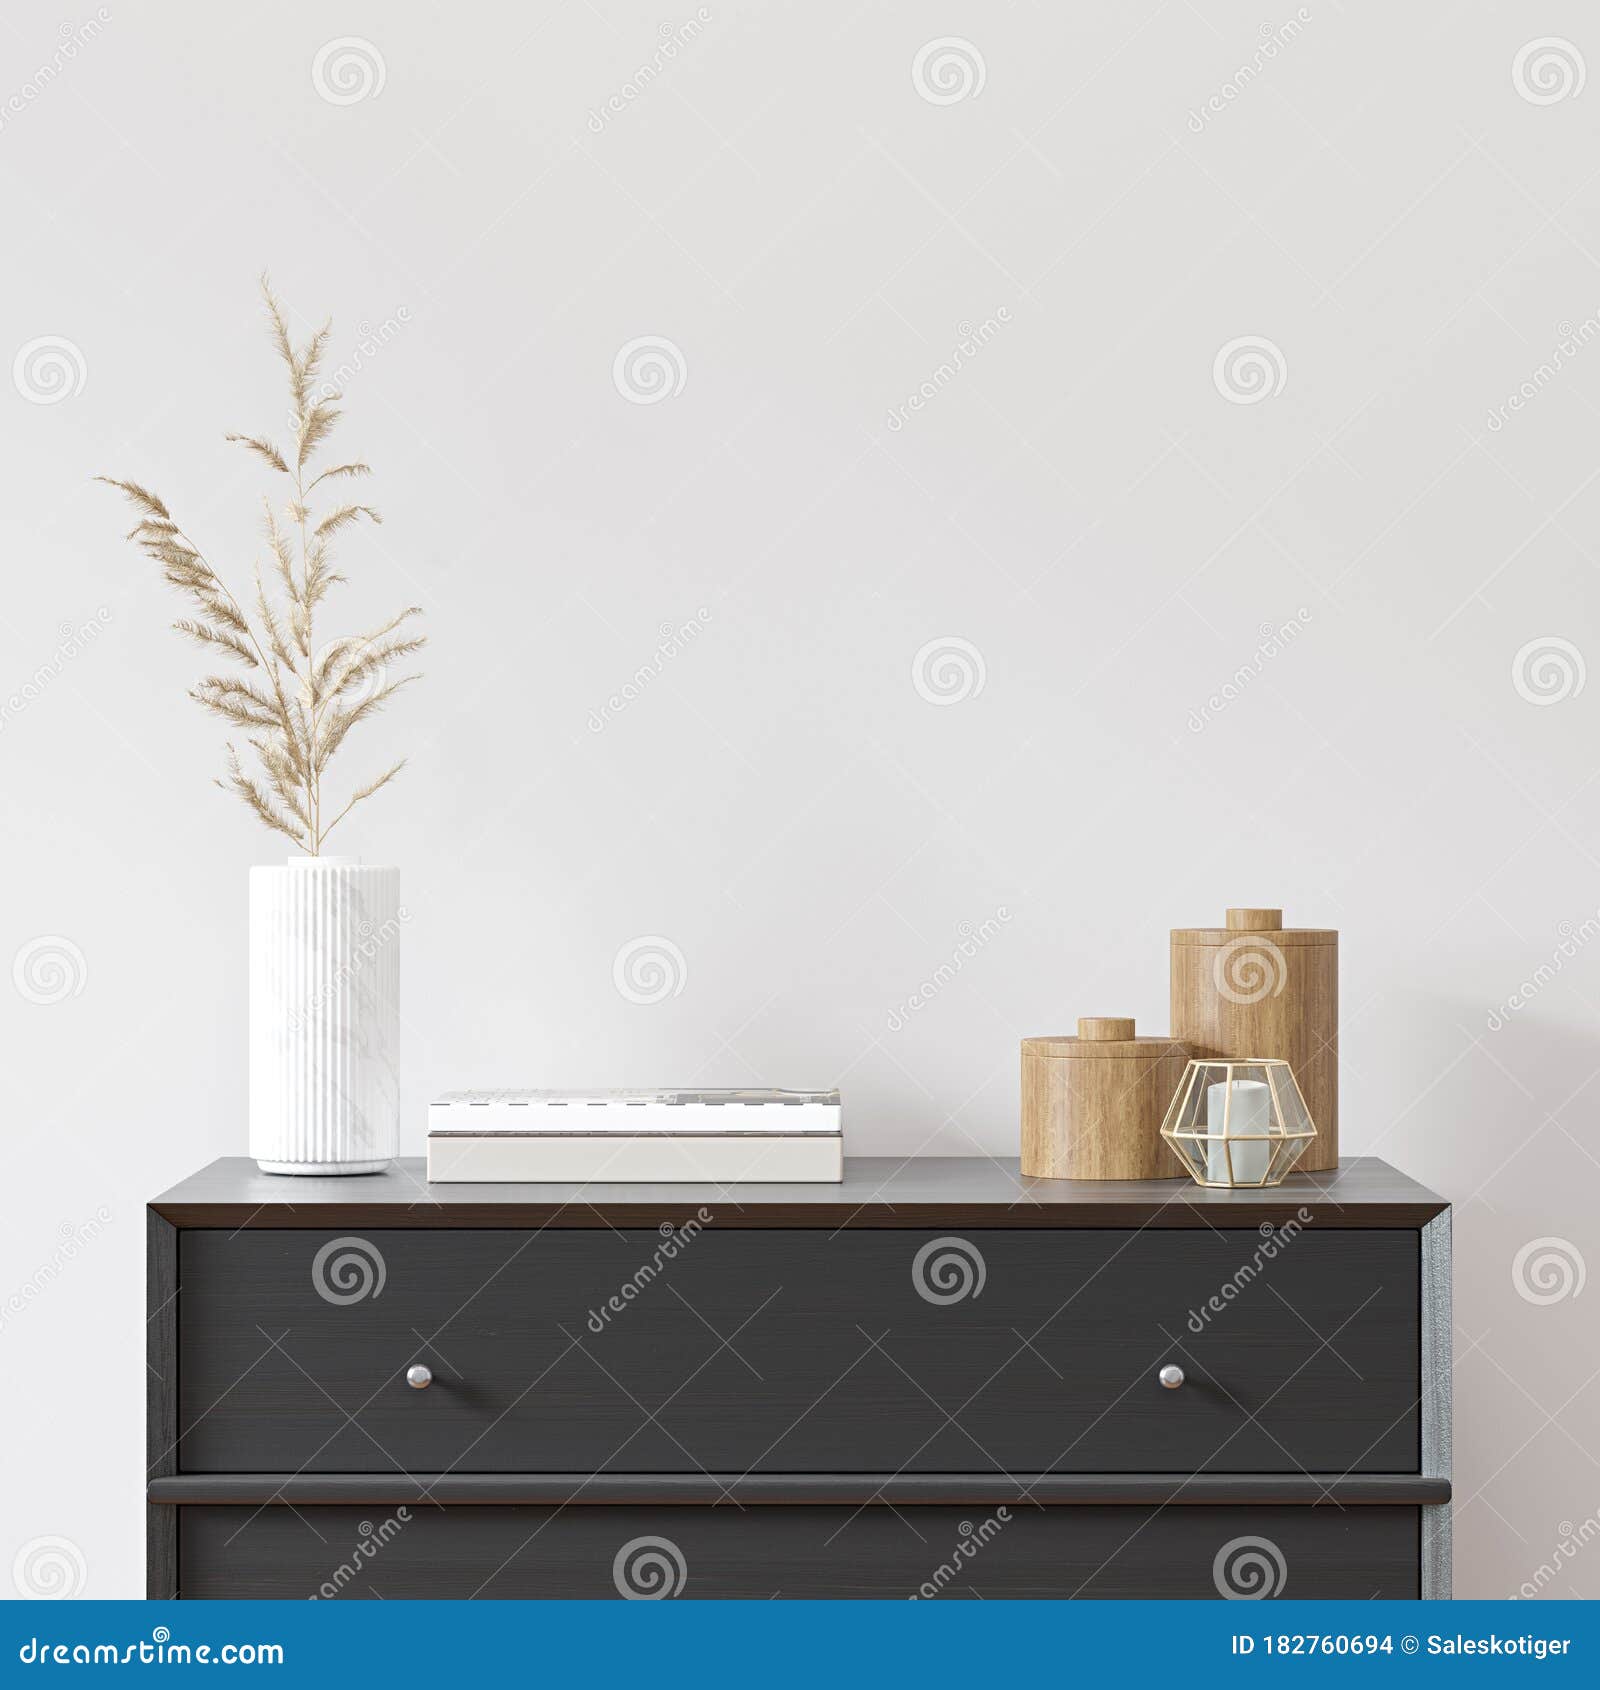 empty white wall with black dresser, white vase and wood decor.